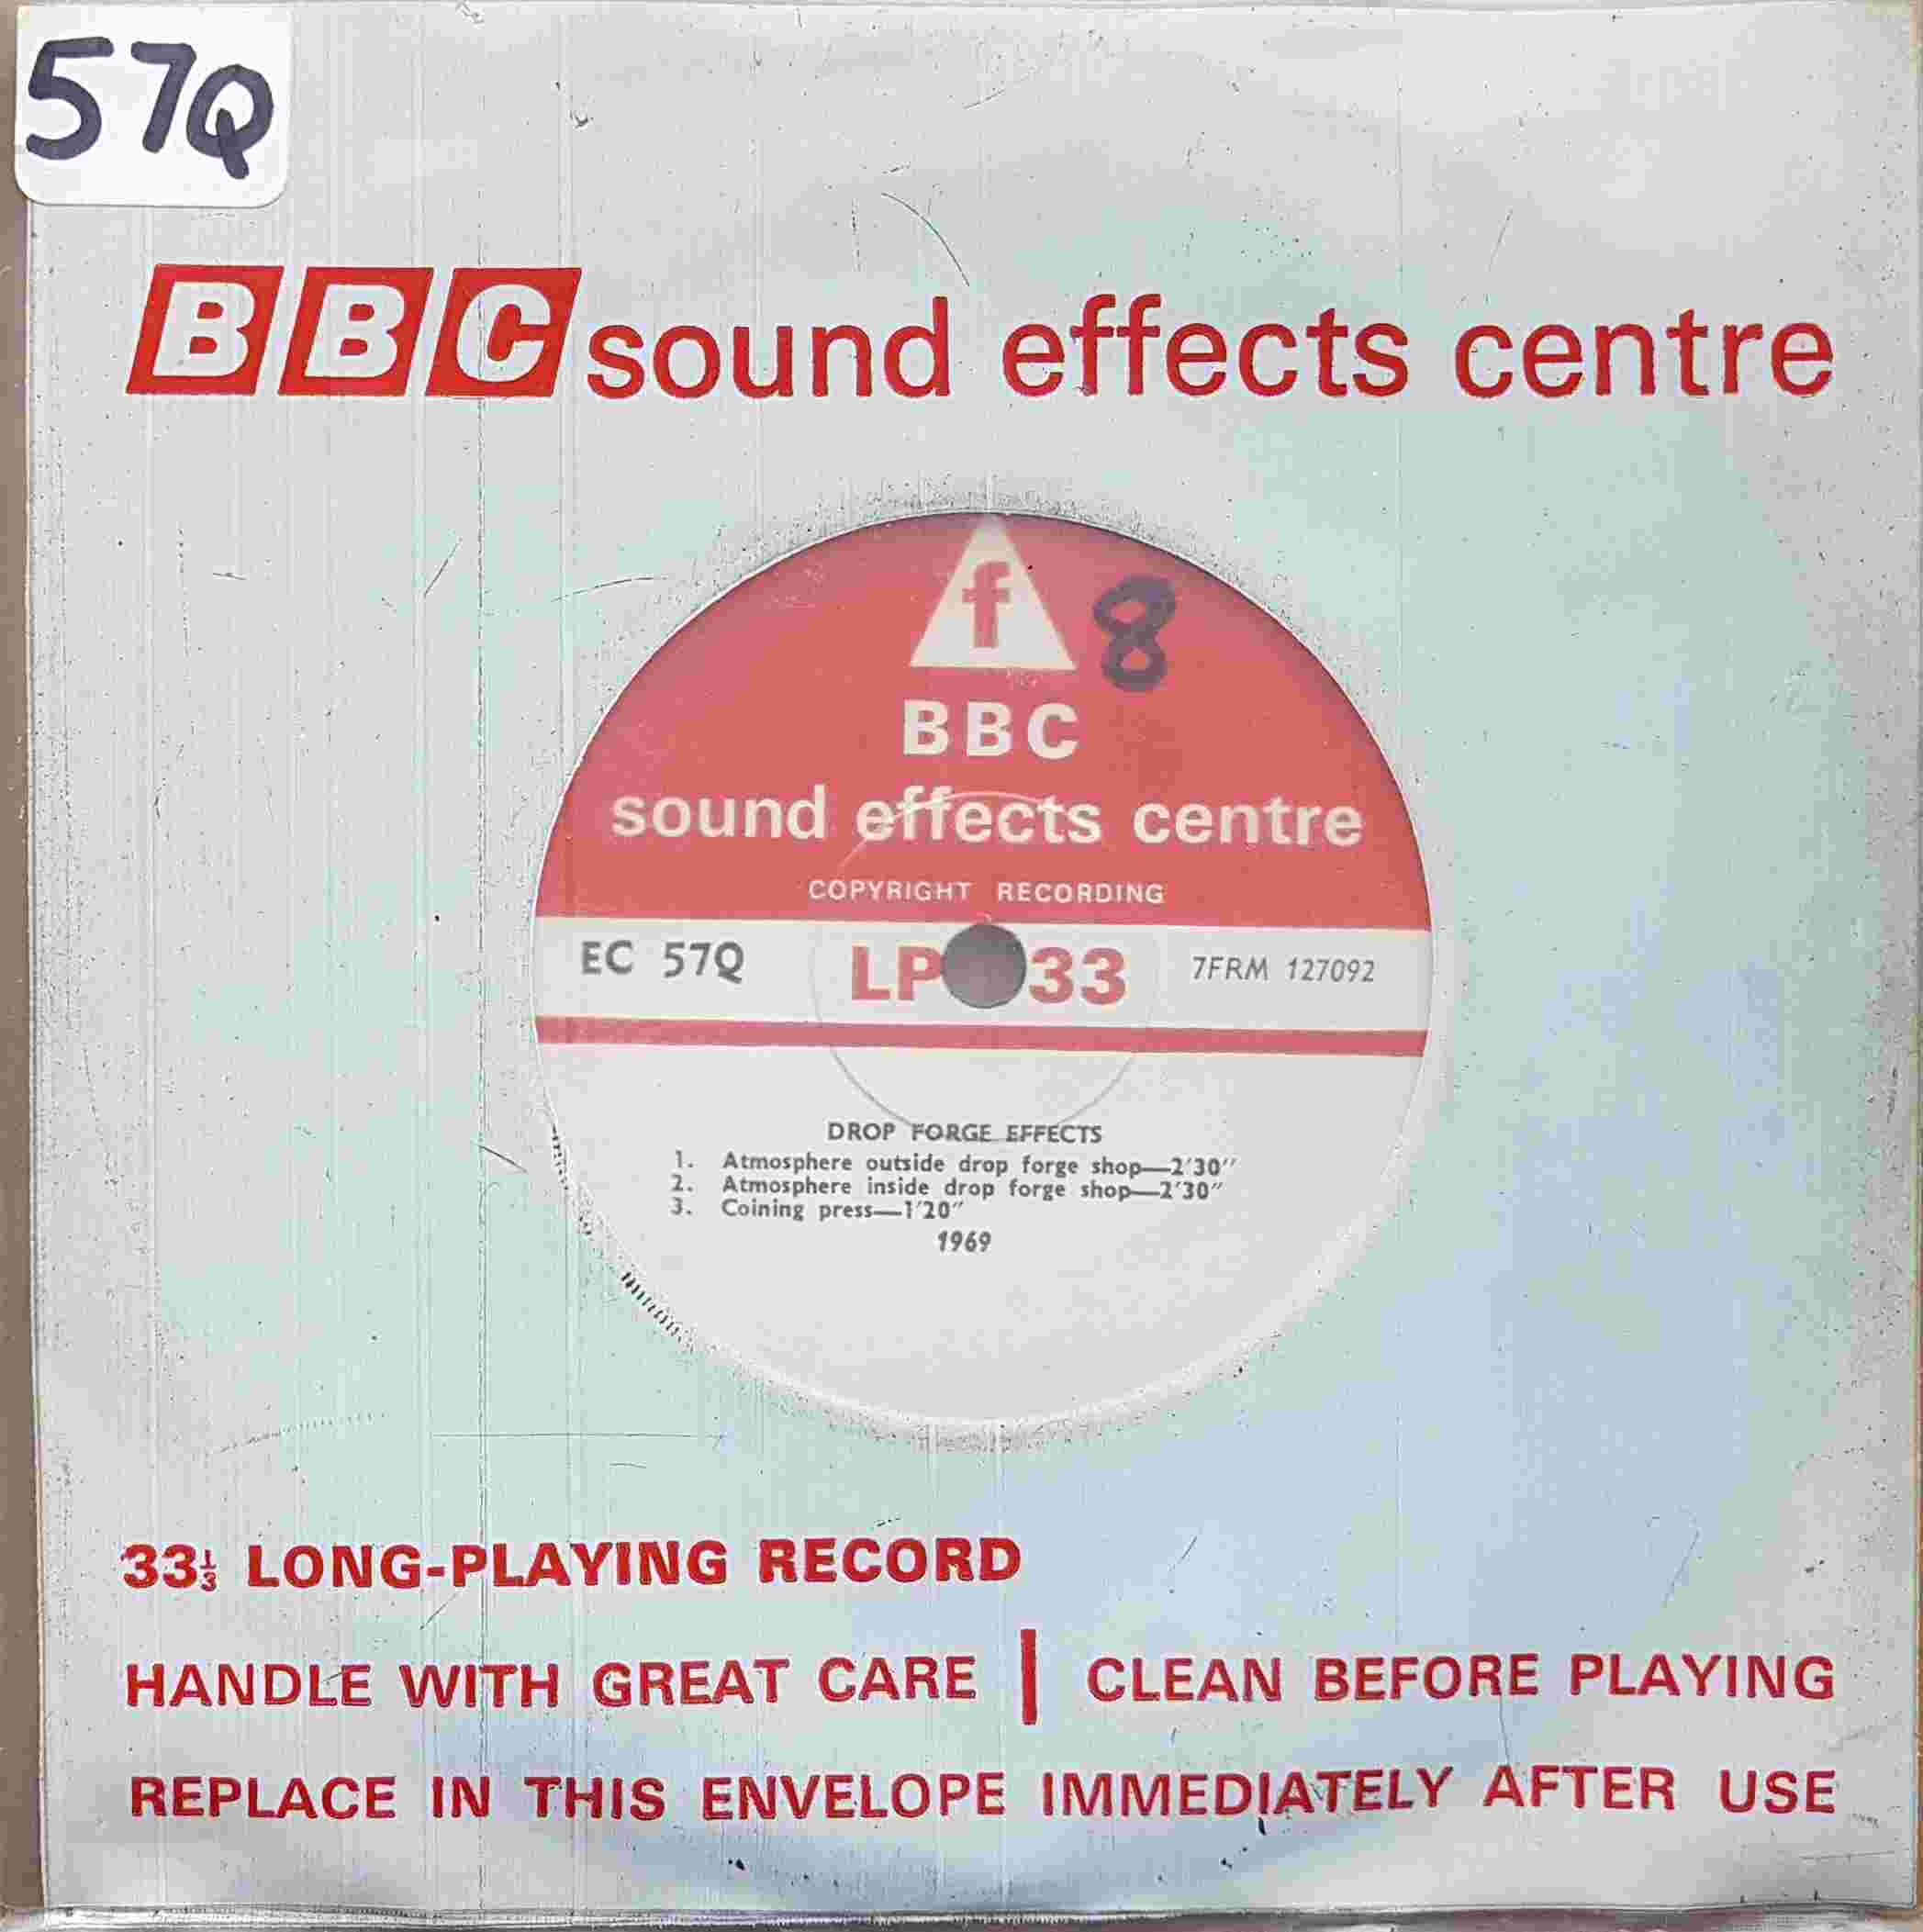 Picture of EC 57Q Drop forge effects by artist Not registered from the BBC records and Tapes library